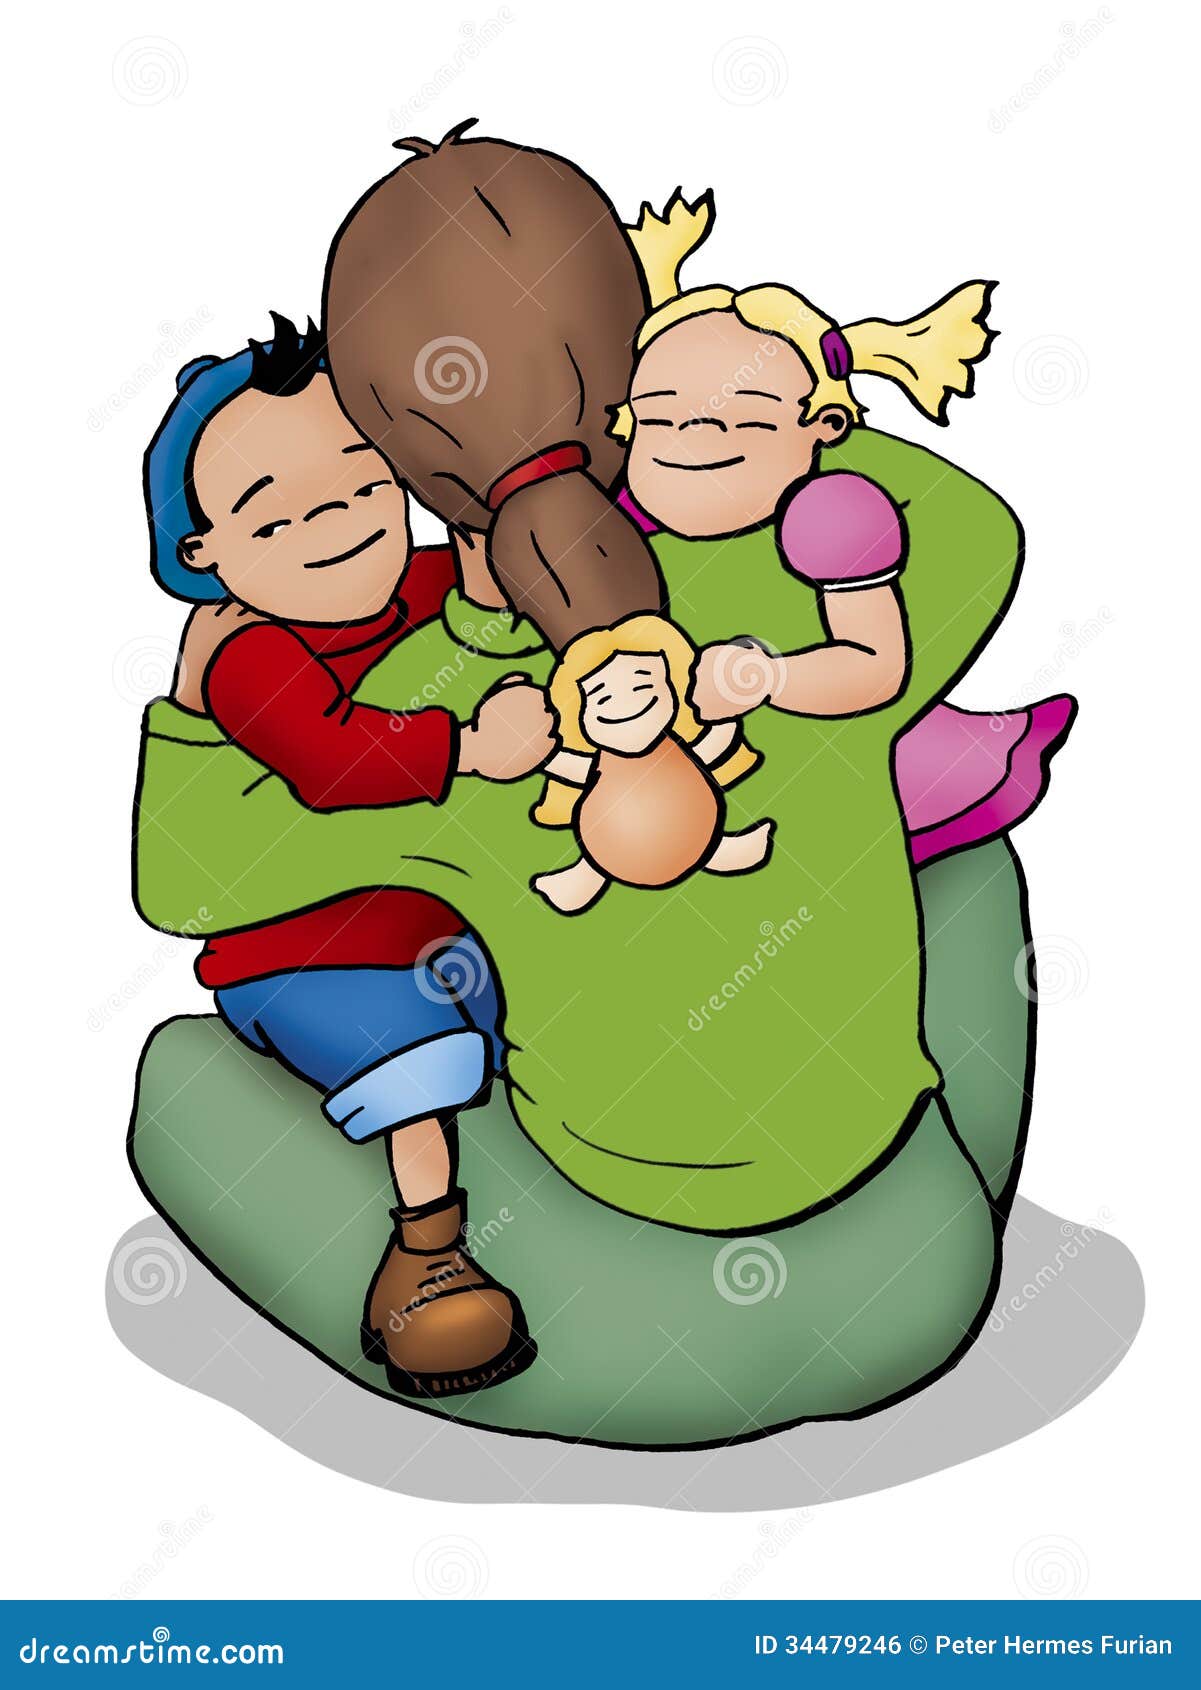 boy and girl hugging clipart - photo #34